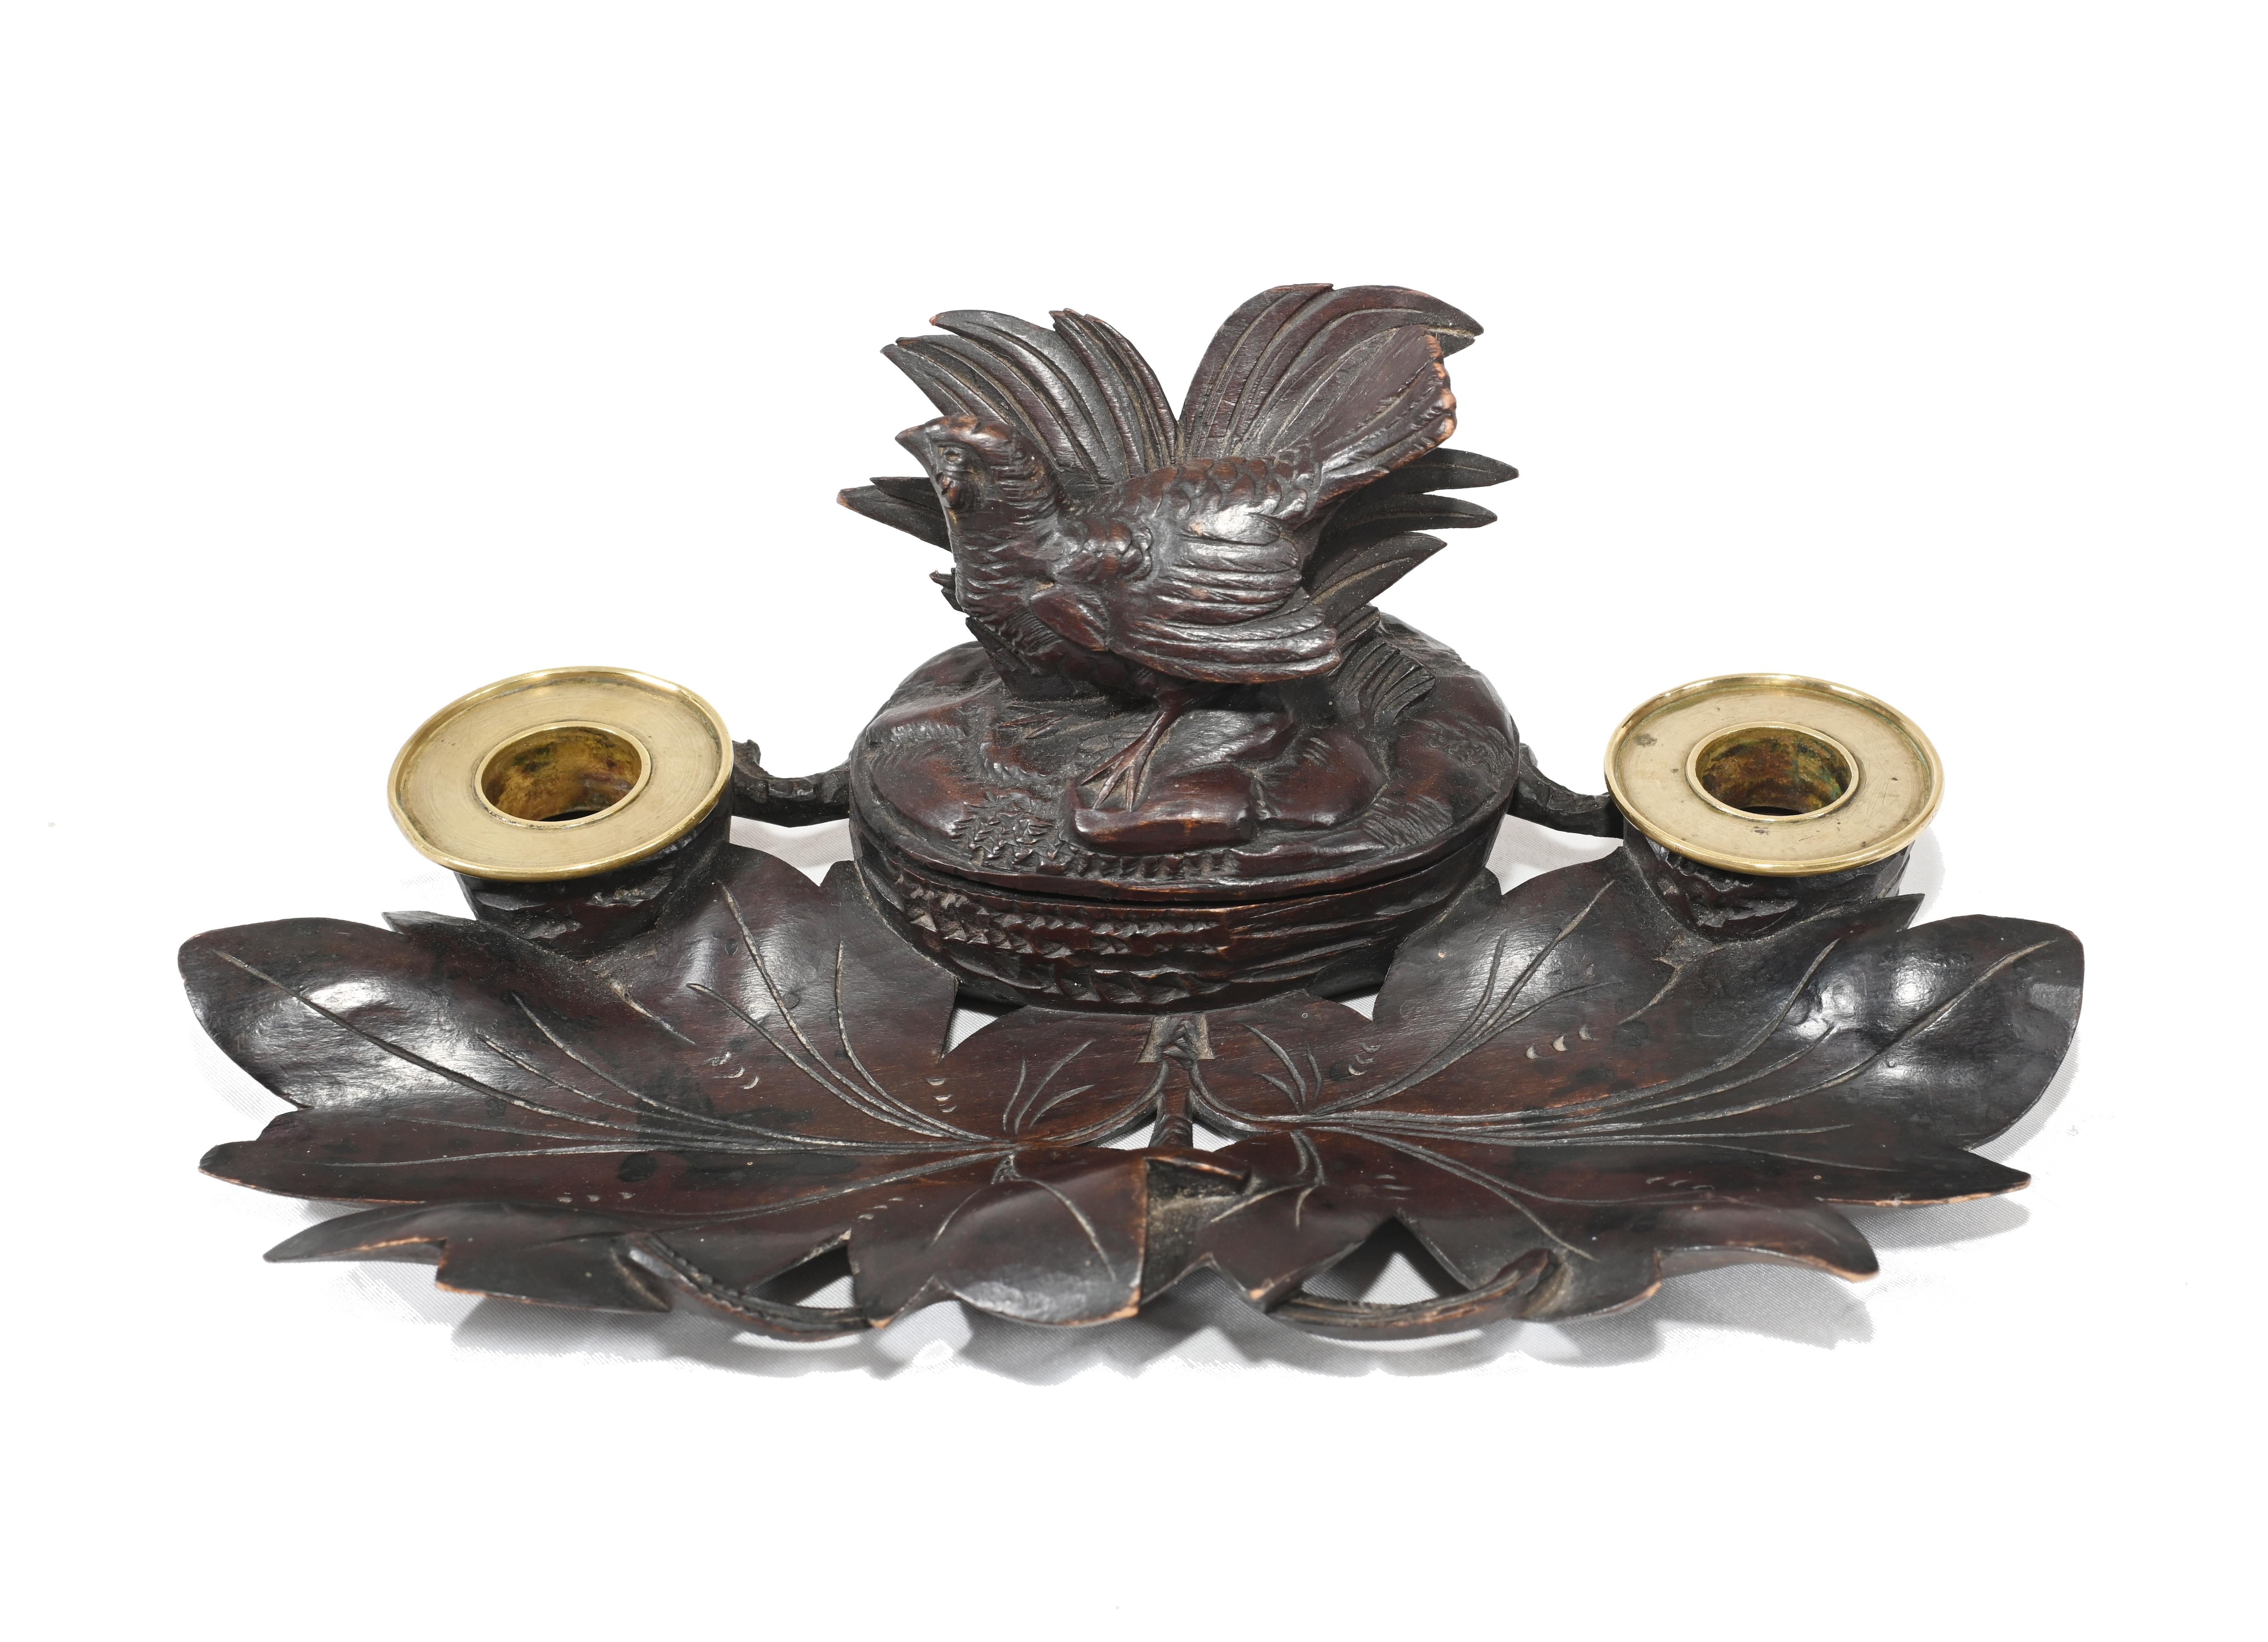 Gorgeous hand carved German black forest inkwell
Great desk accessory or as a decorative piece in it's own right
Carving is incredibly detailed from hardwood
We date this piece to circa 1880
Some of our items are in storage so please check ahead